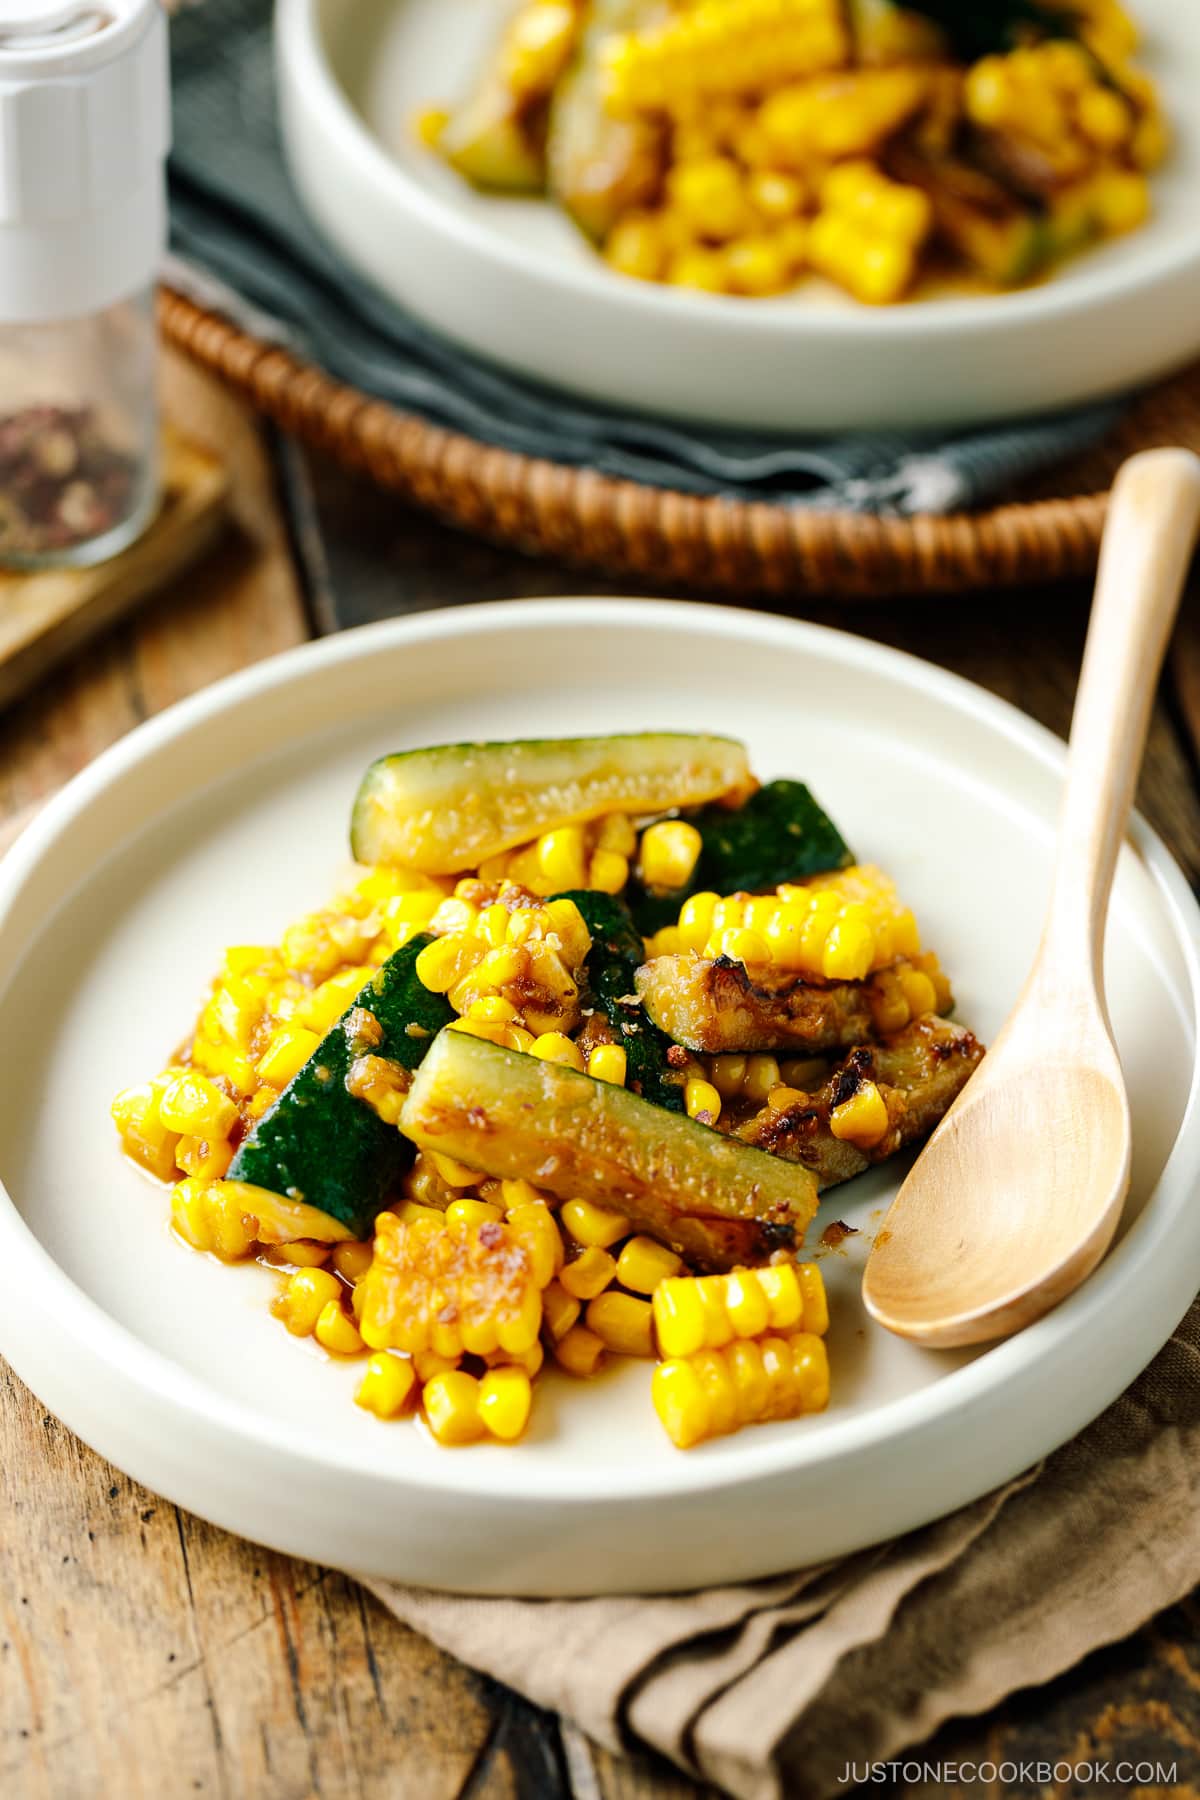 A white plate containing zucchini corn stir fry seasoned with miso butter.